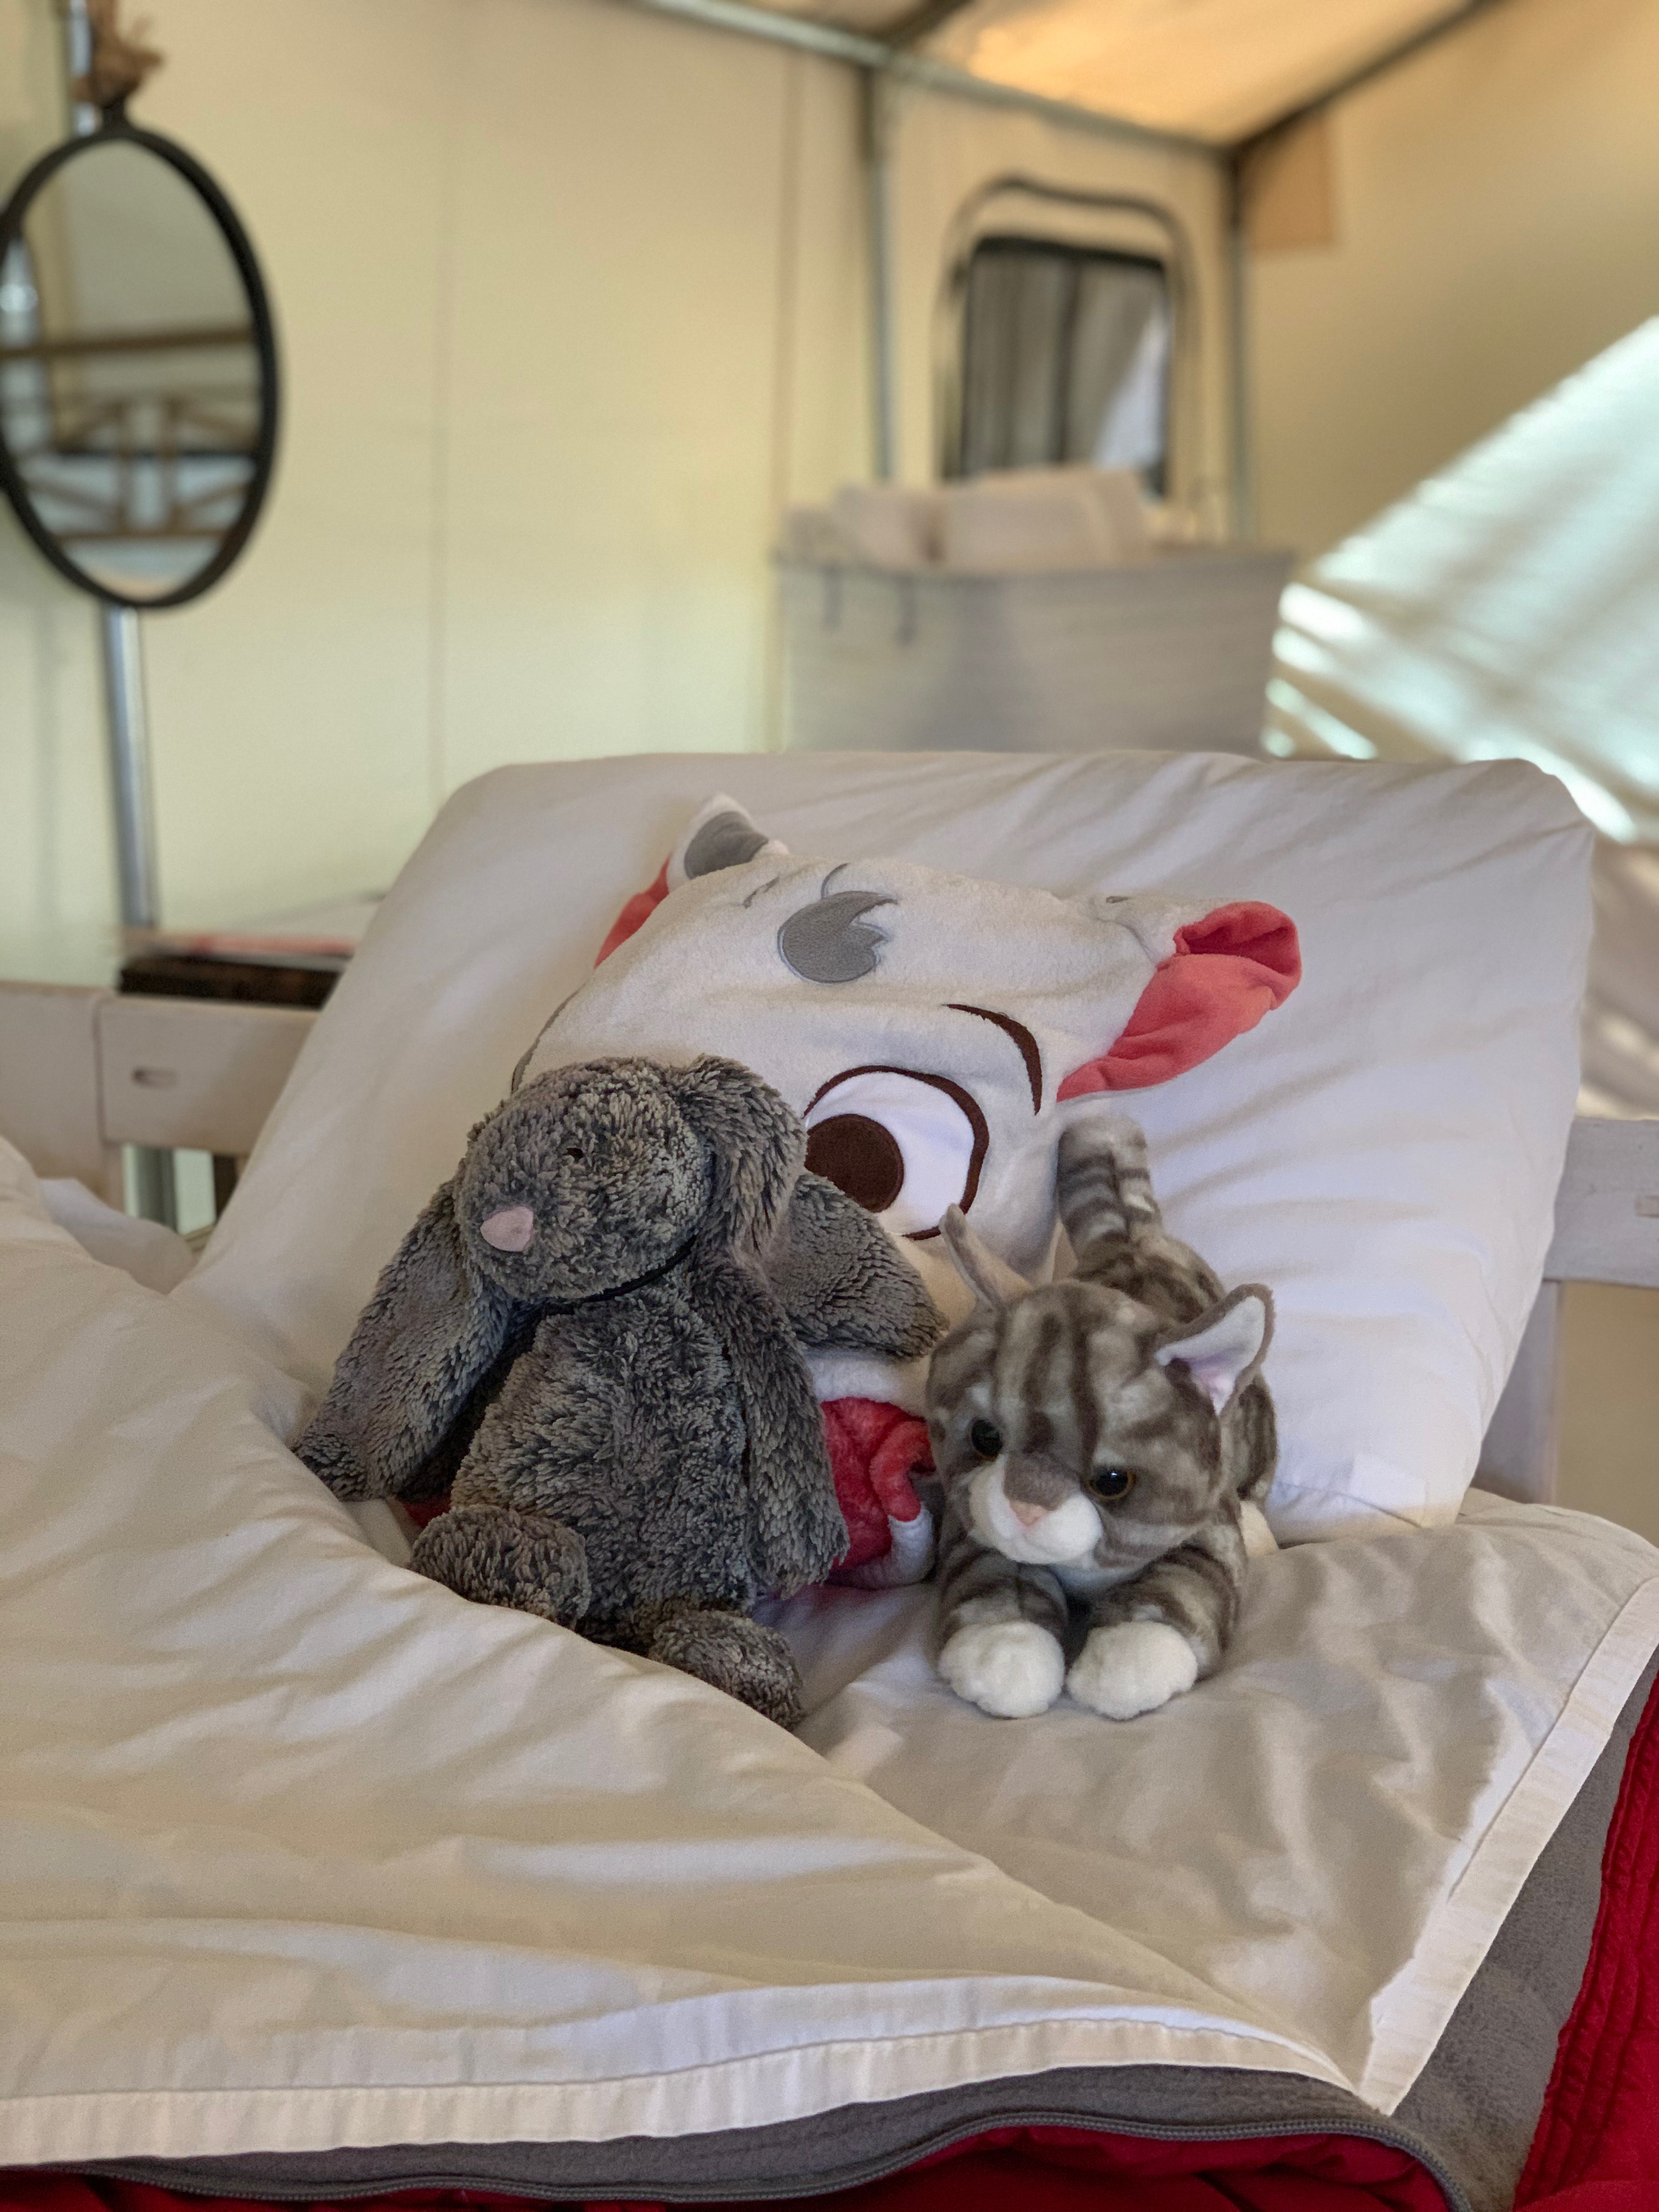 stuffed animals on a bed in a safari tent